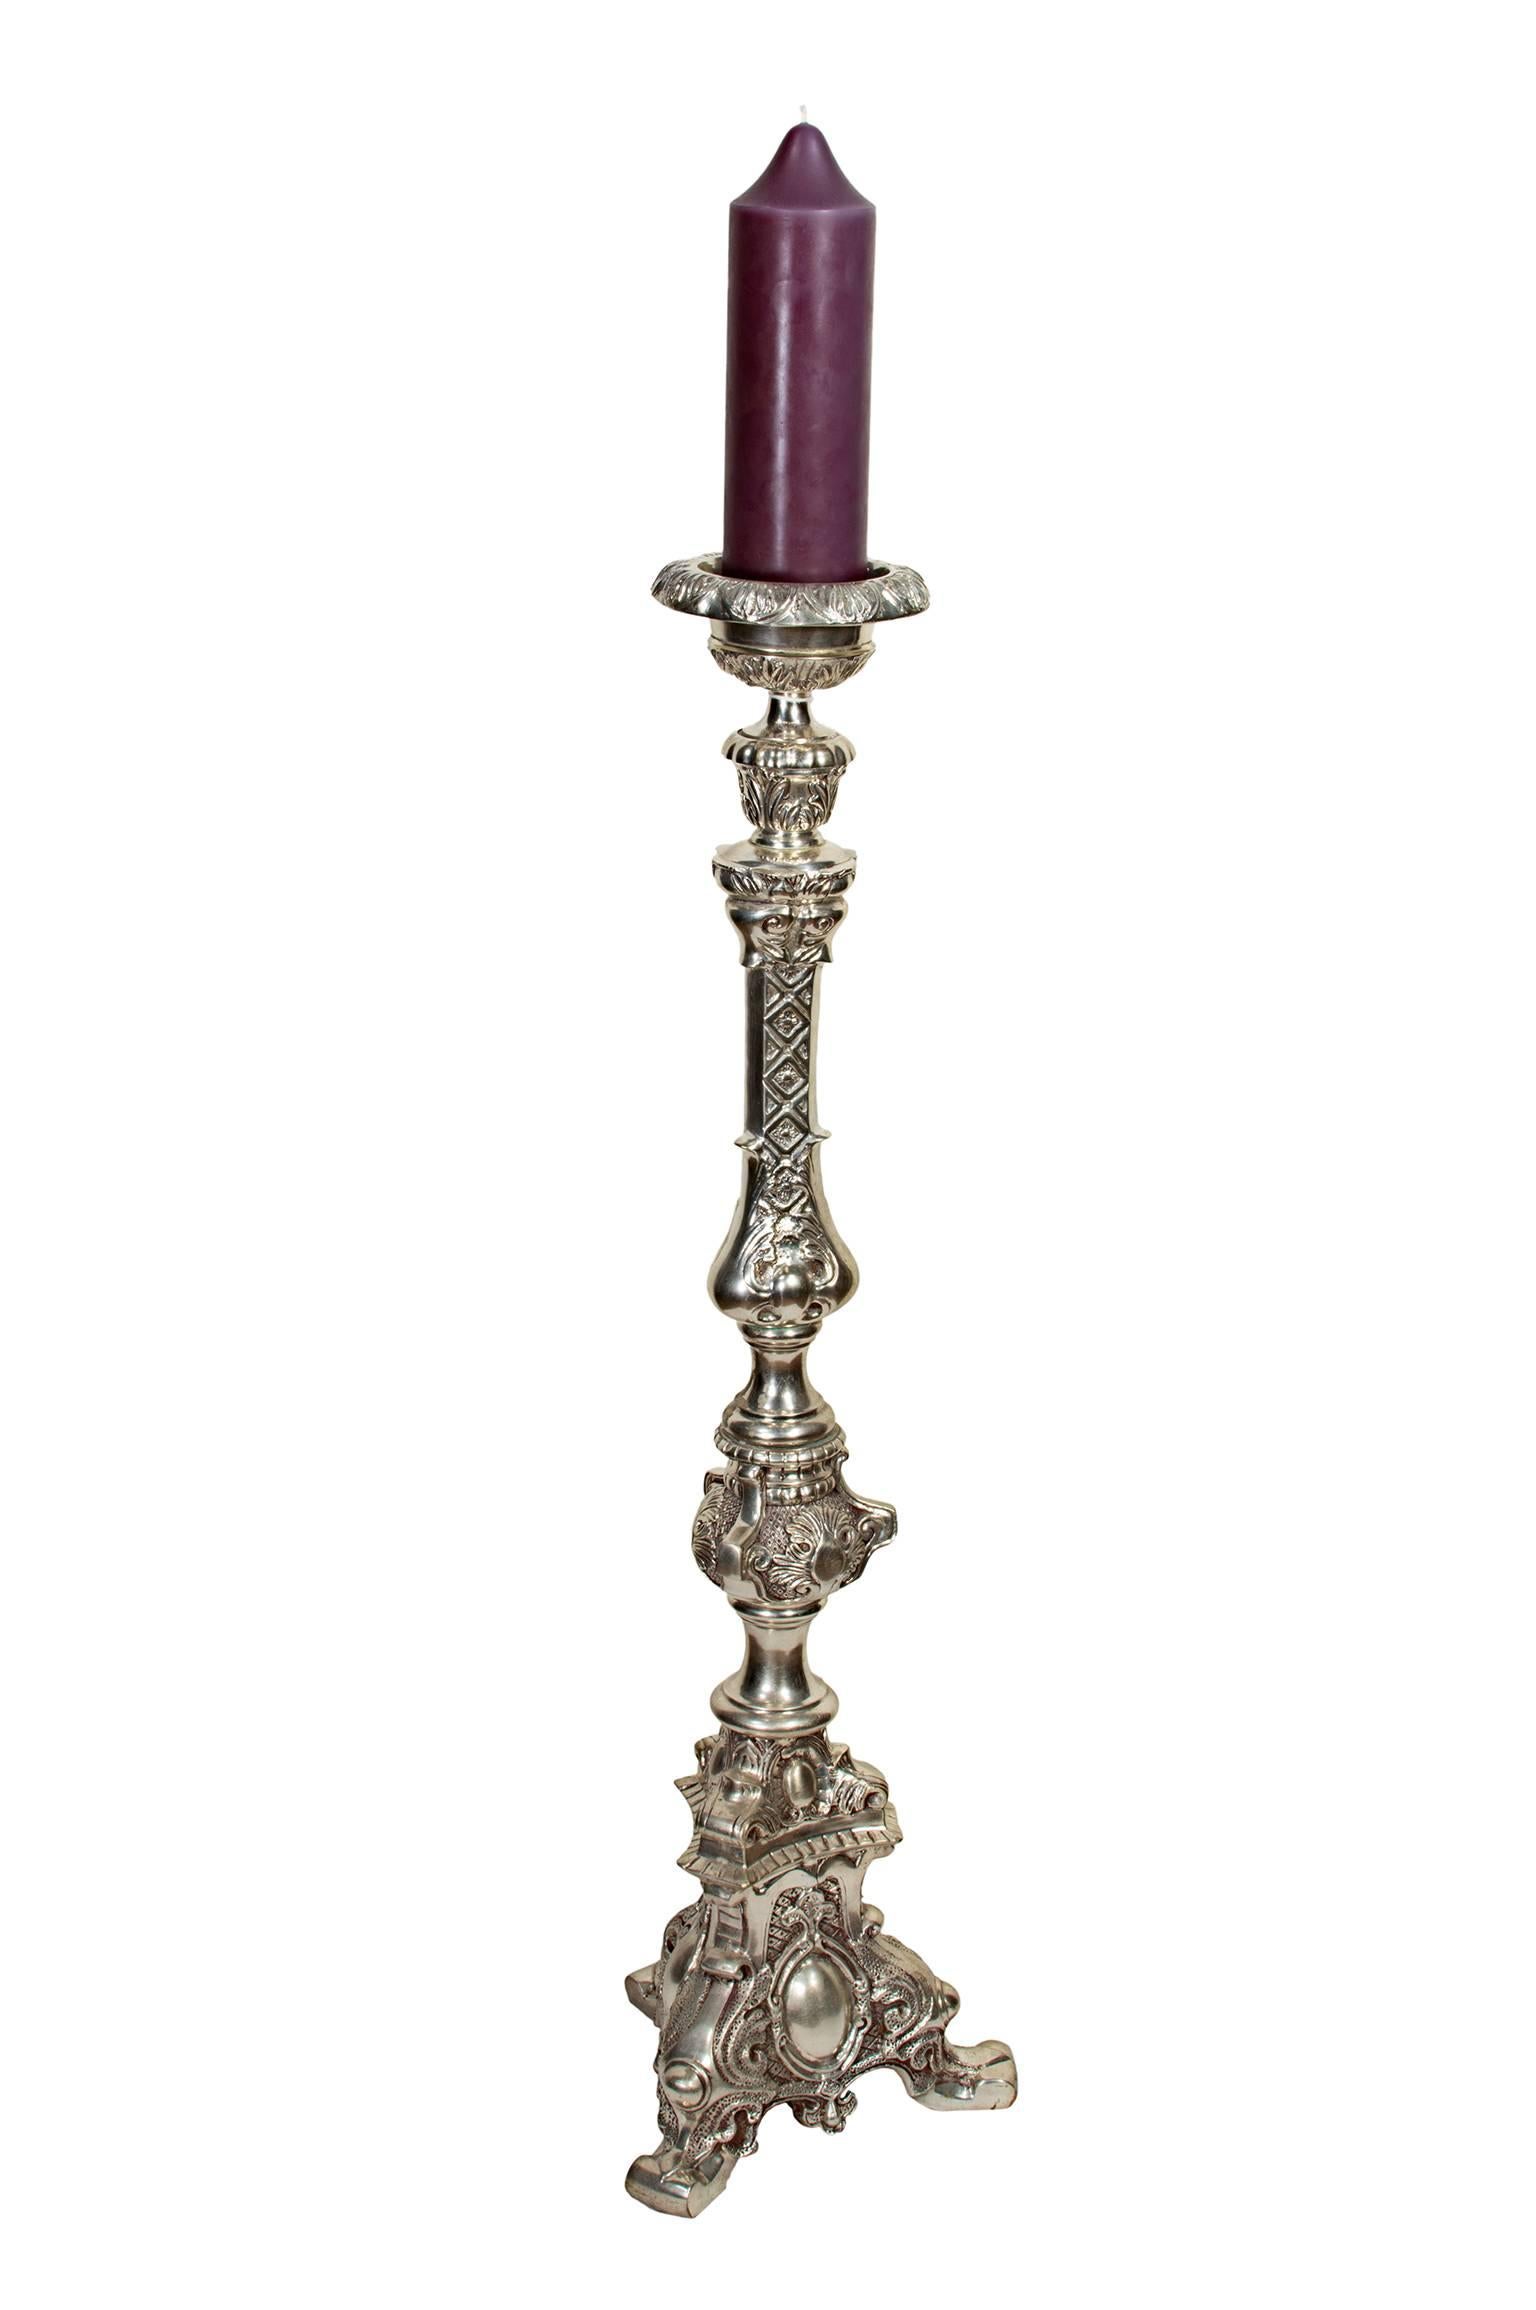 This pair of silver-plated candlesticks were created by an unknown artist in 2000.